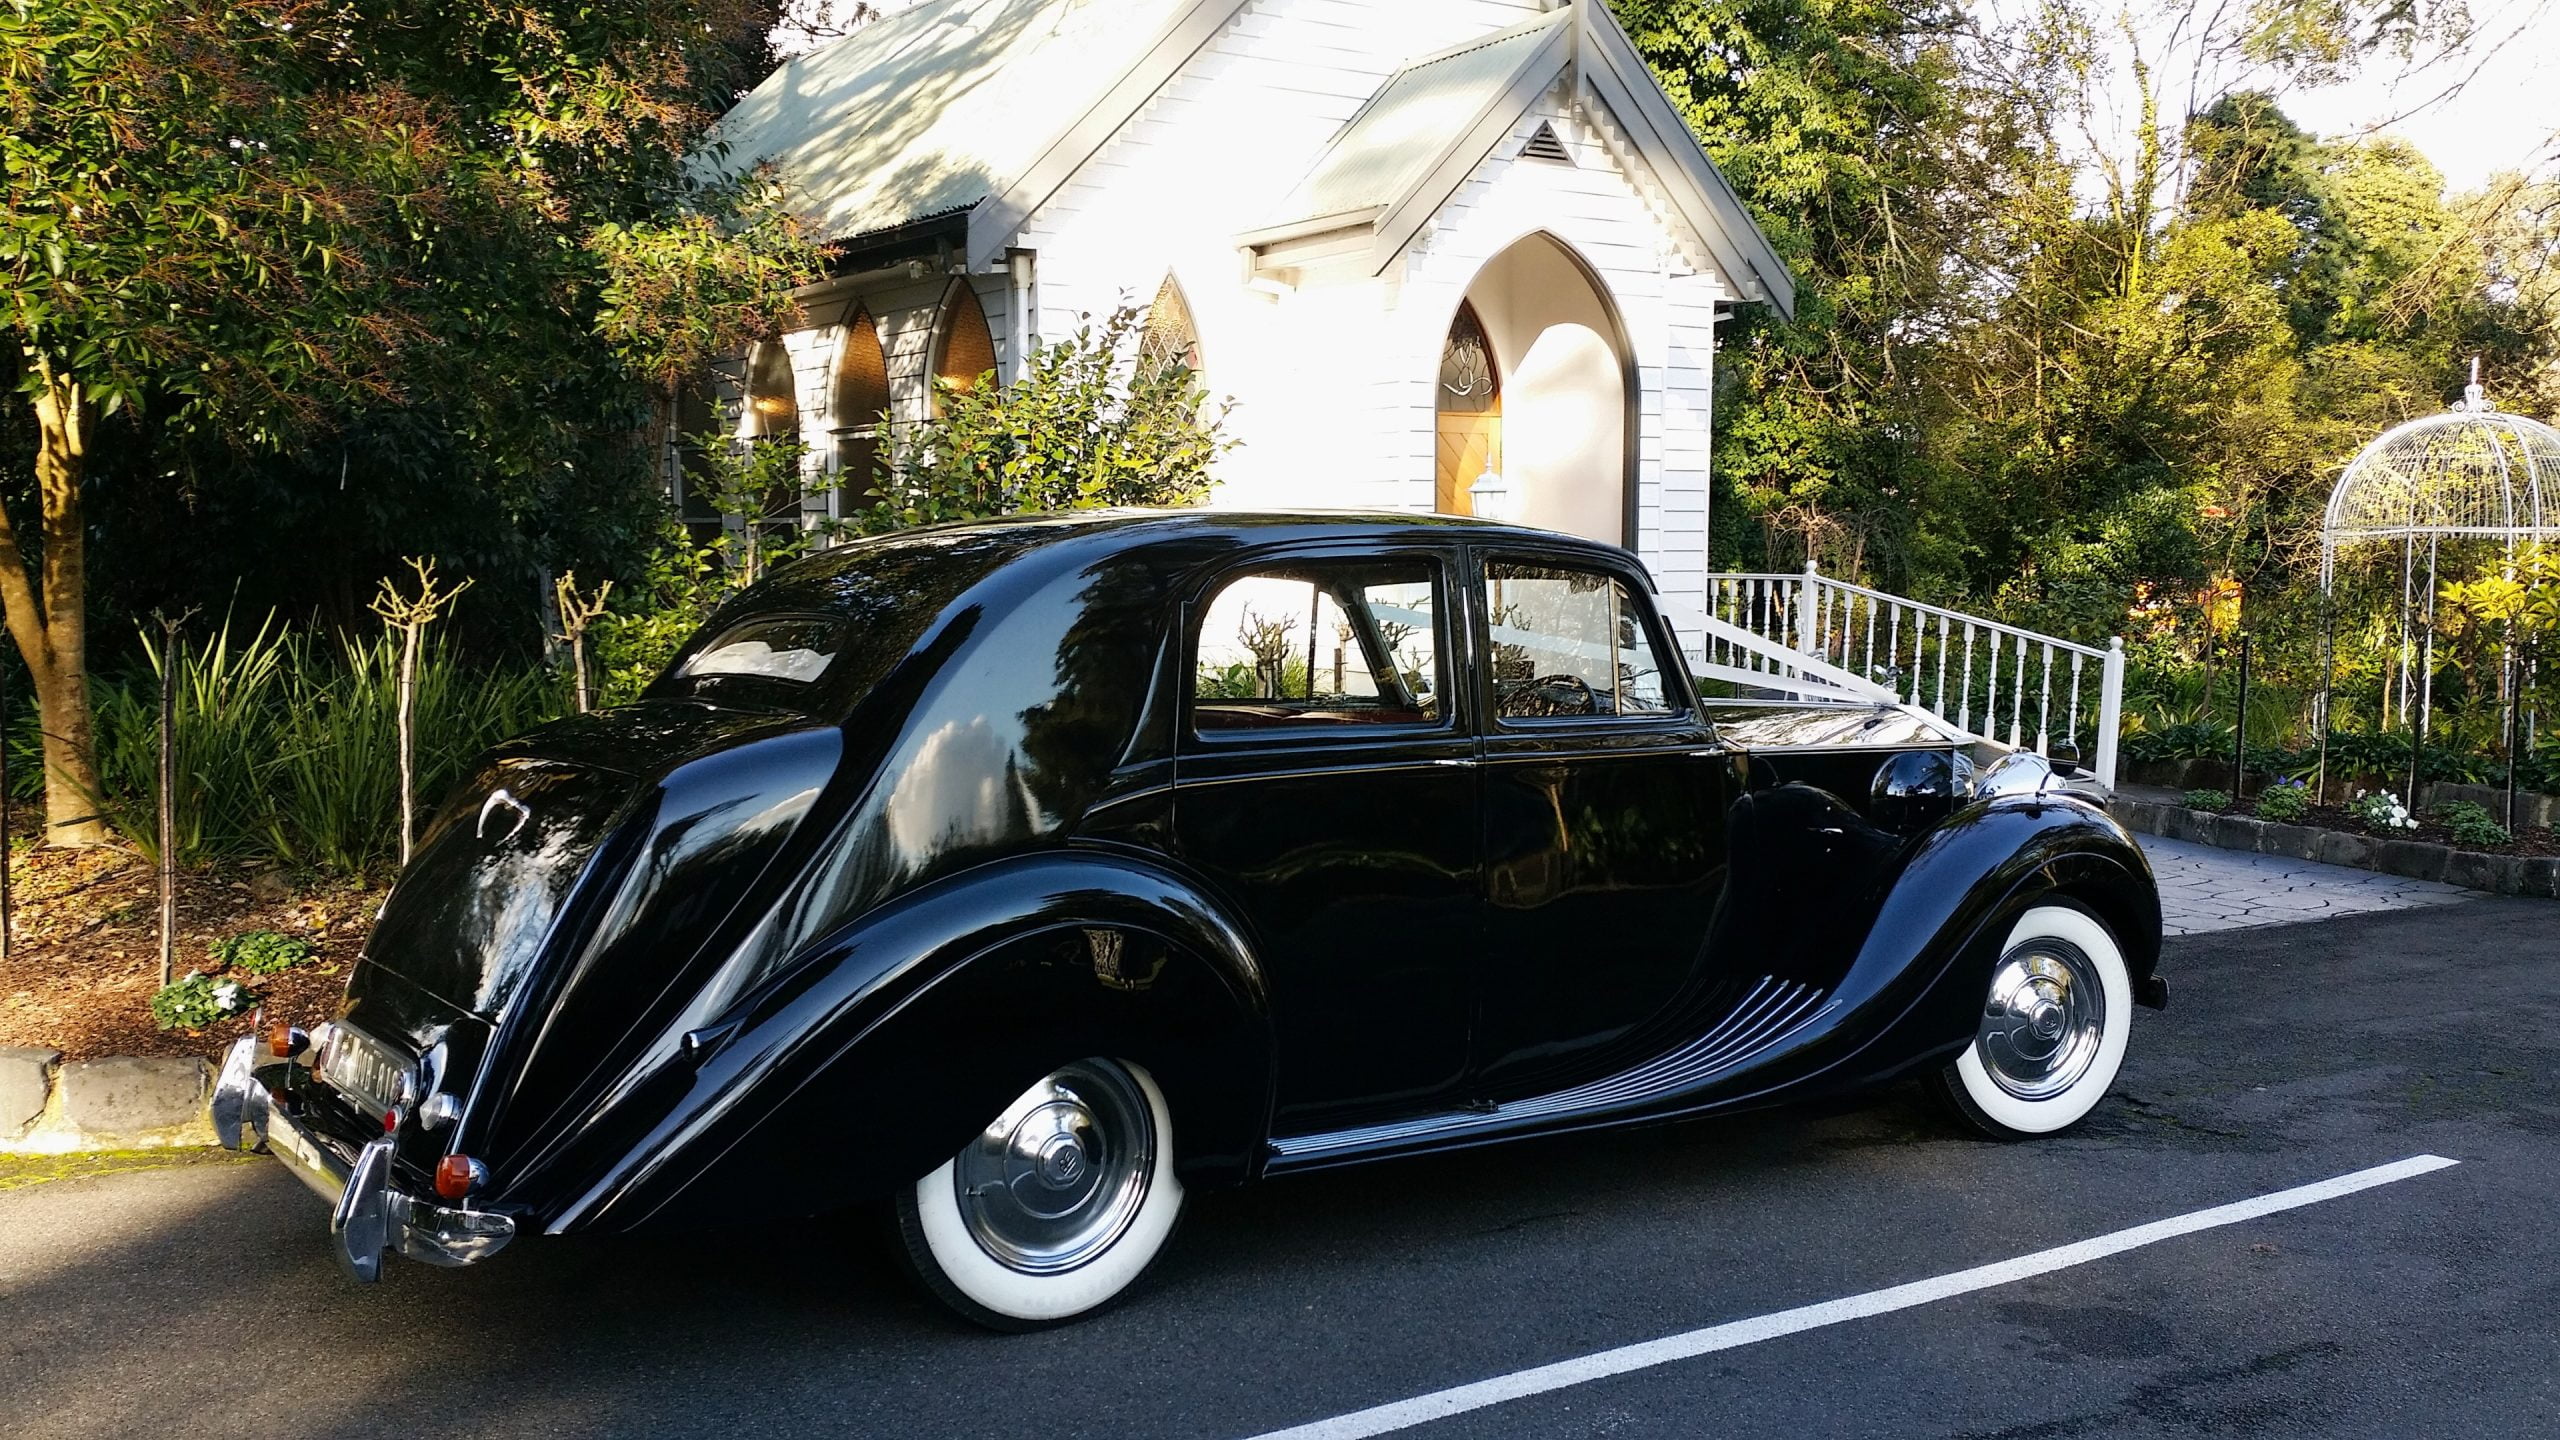 1947 Rolls Royce Wraith at Bram Leigh's for Cathie and Jiang (1)